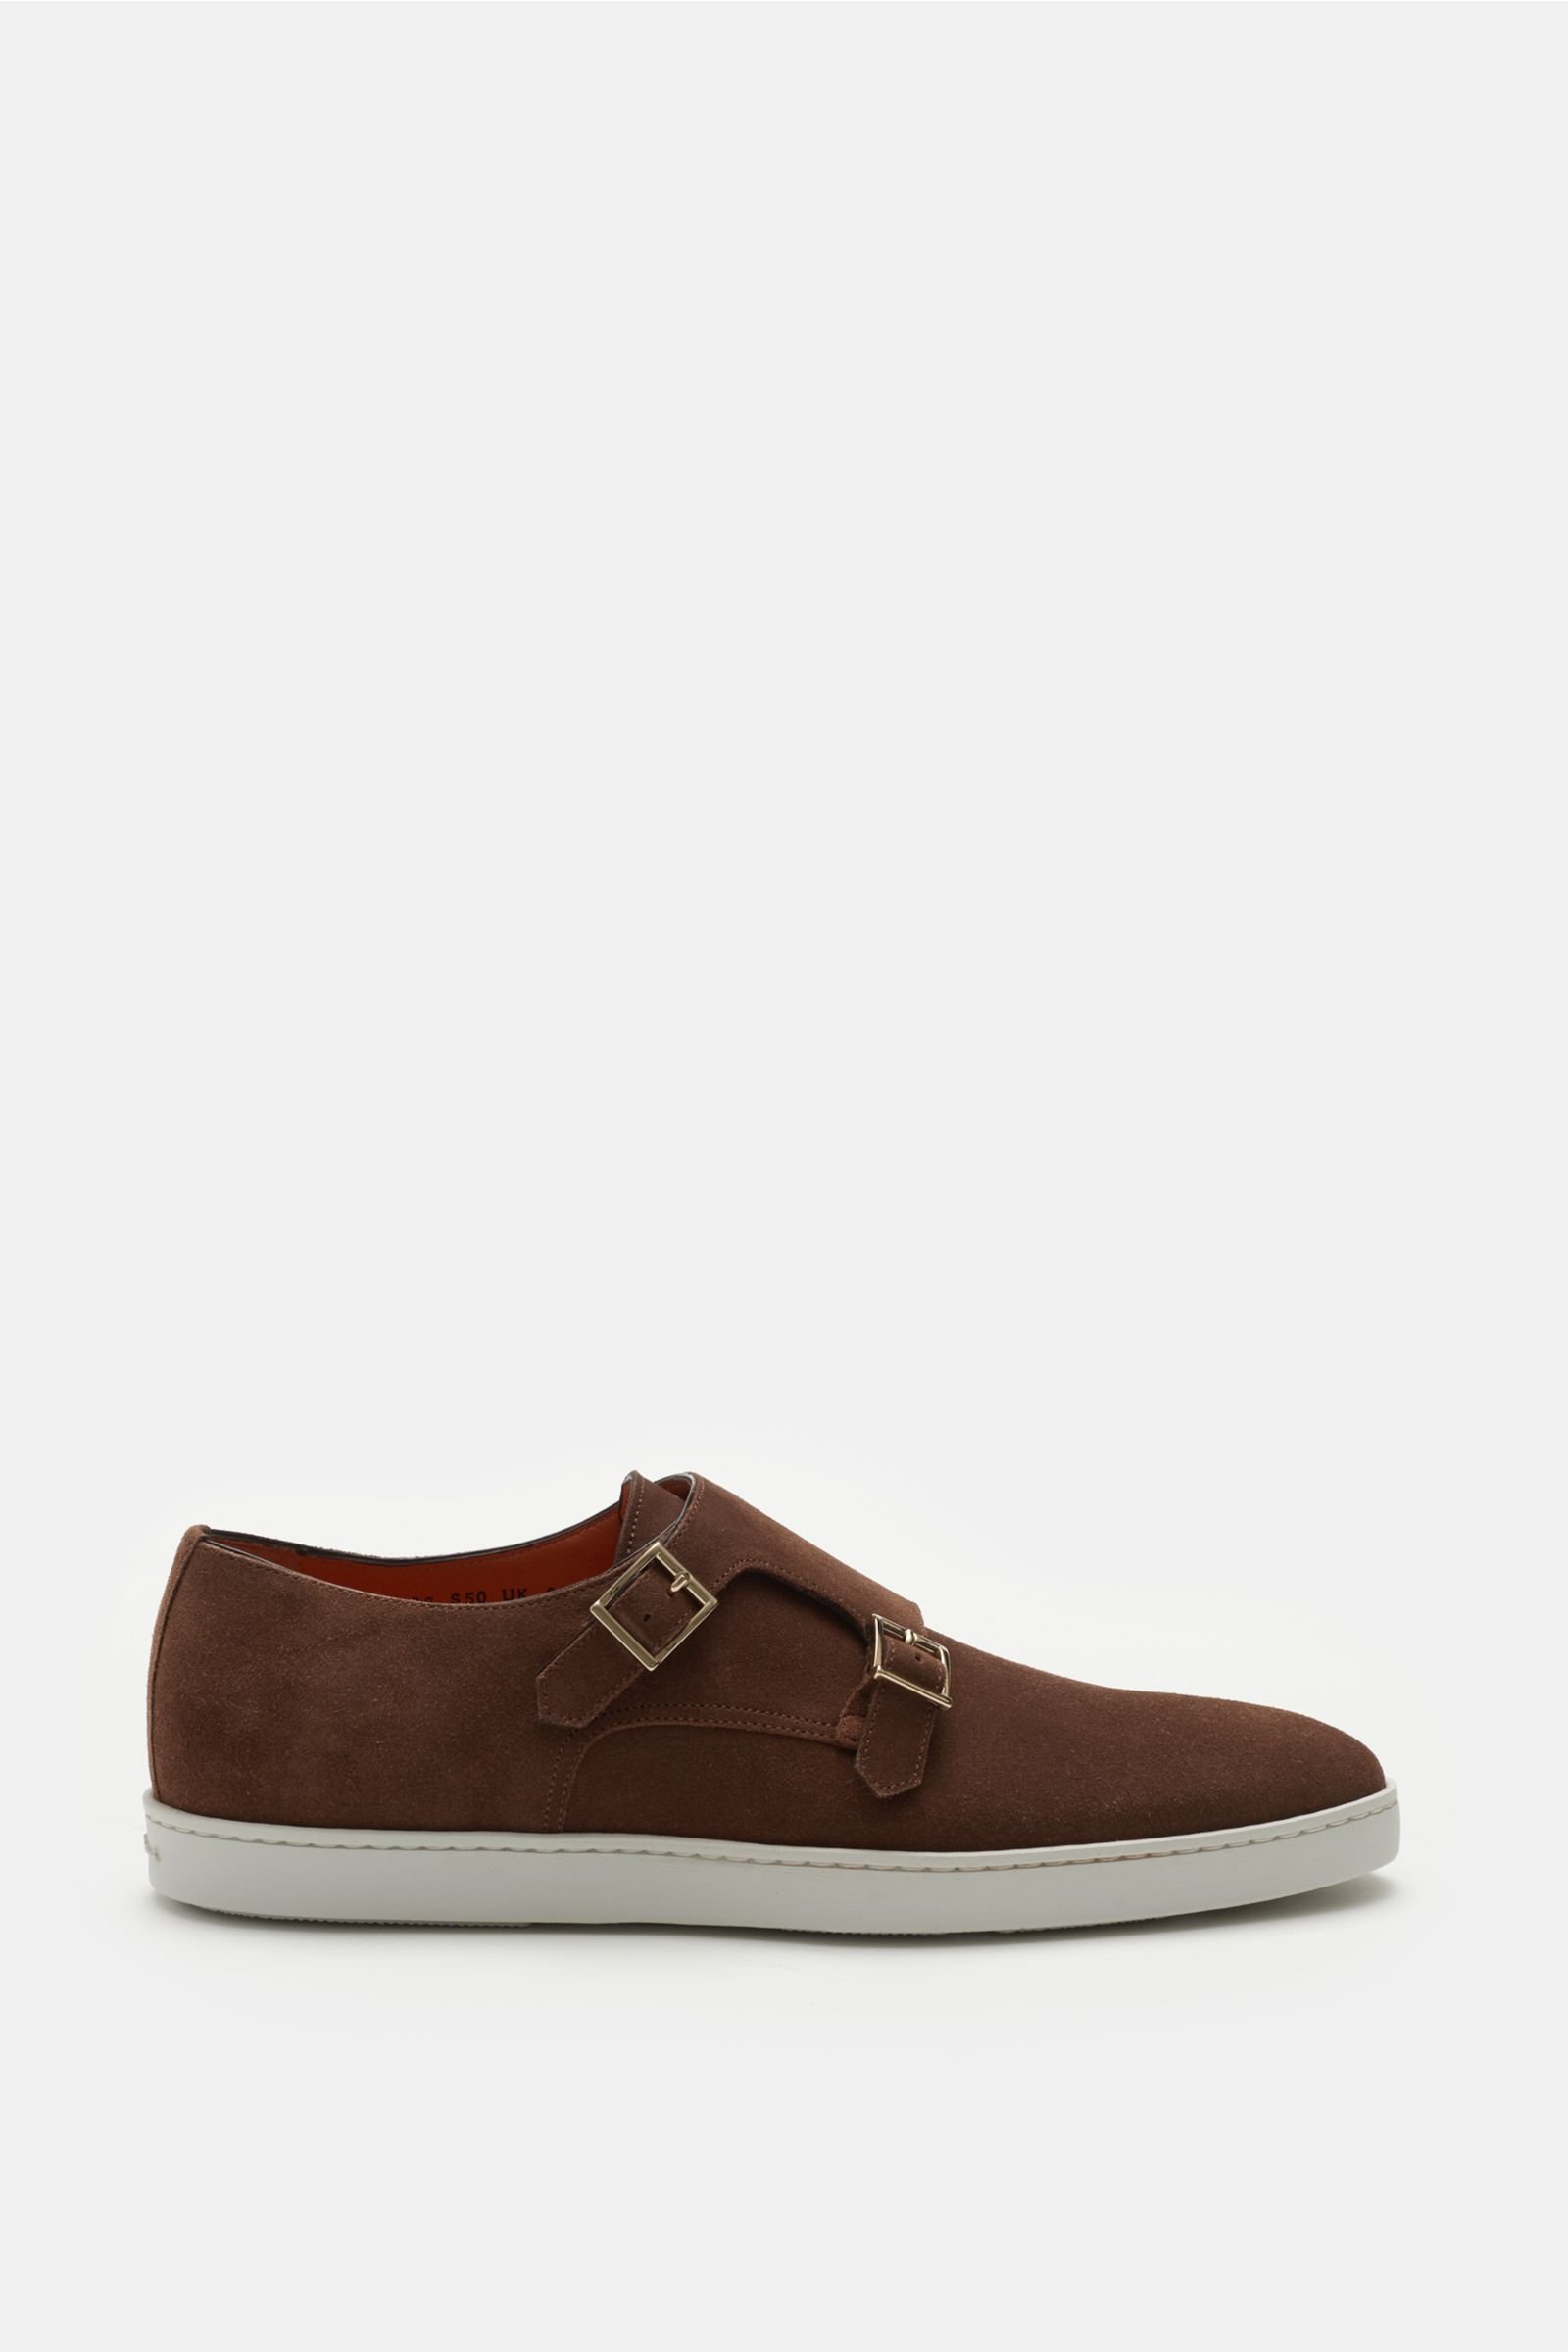 Double monk shoes brown